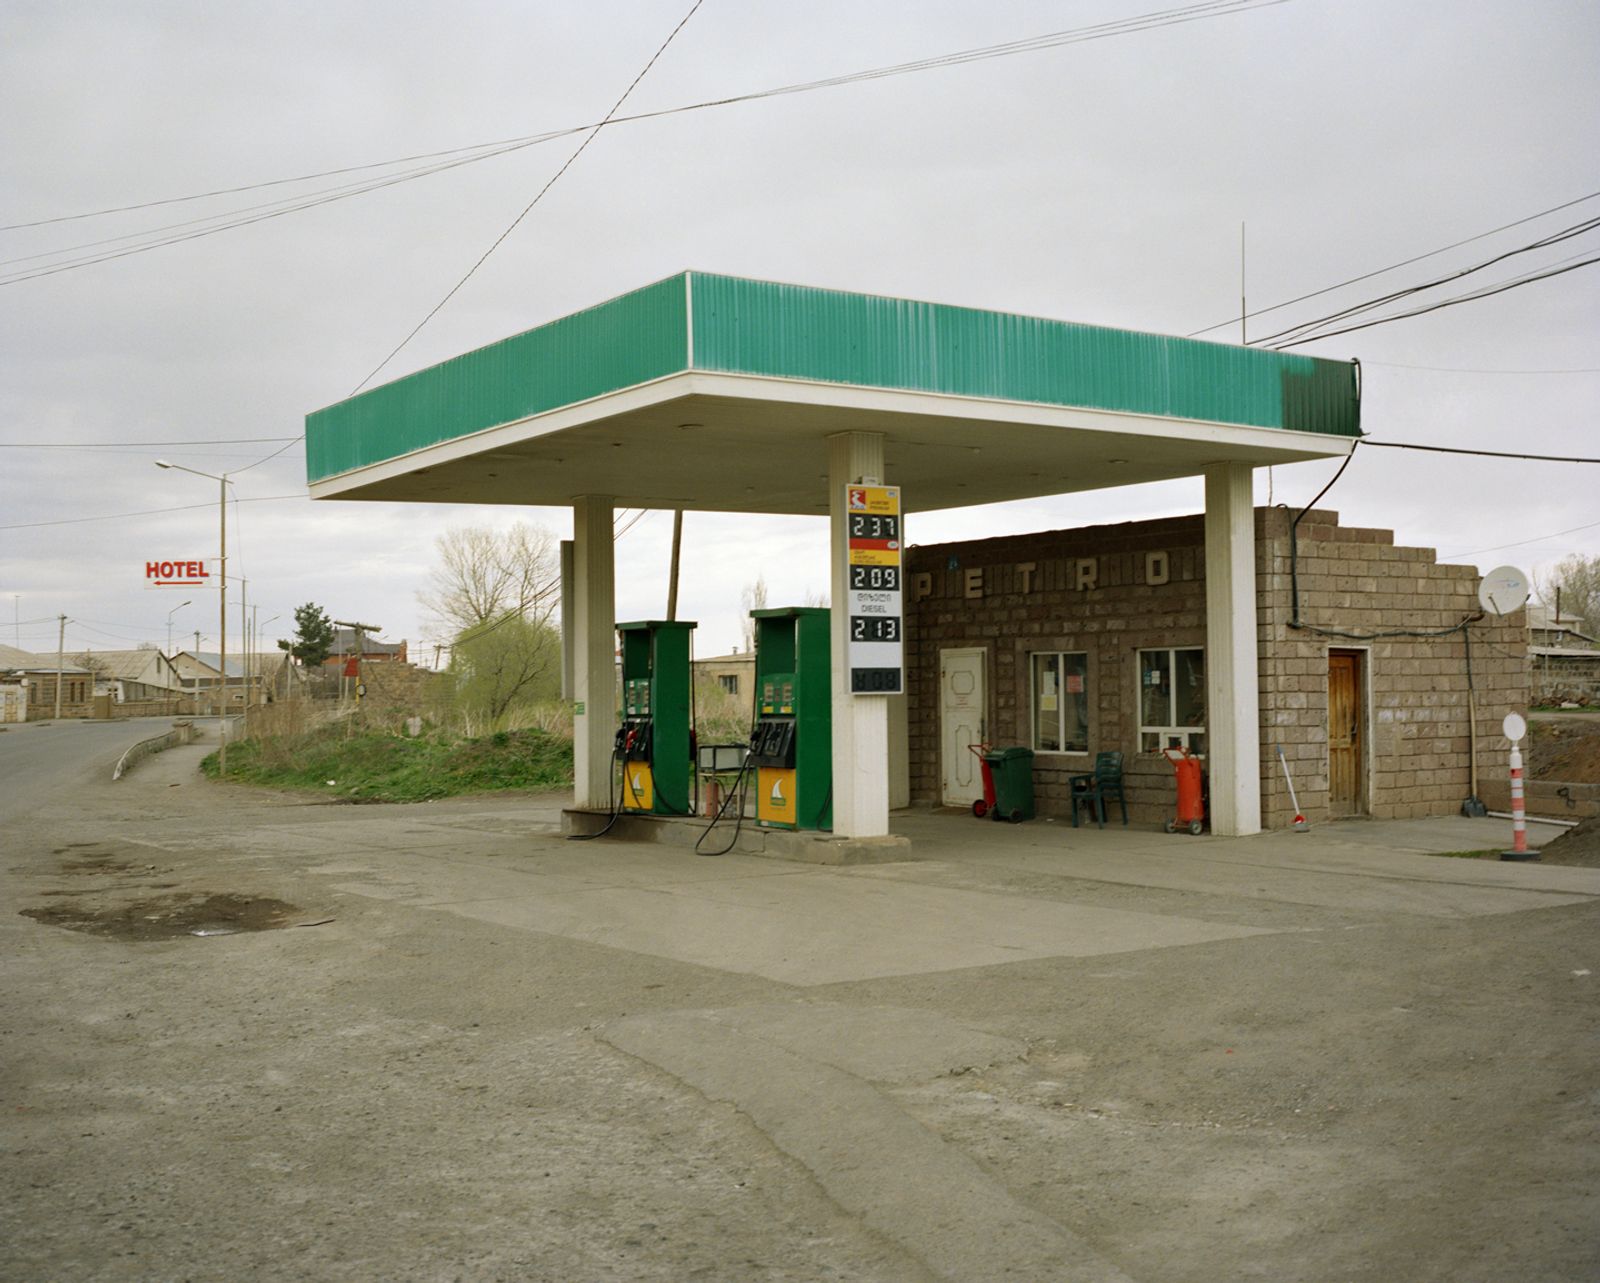 © Chloe Borkett - Image from the Georgia: in the Shadow of Europe photography project